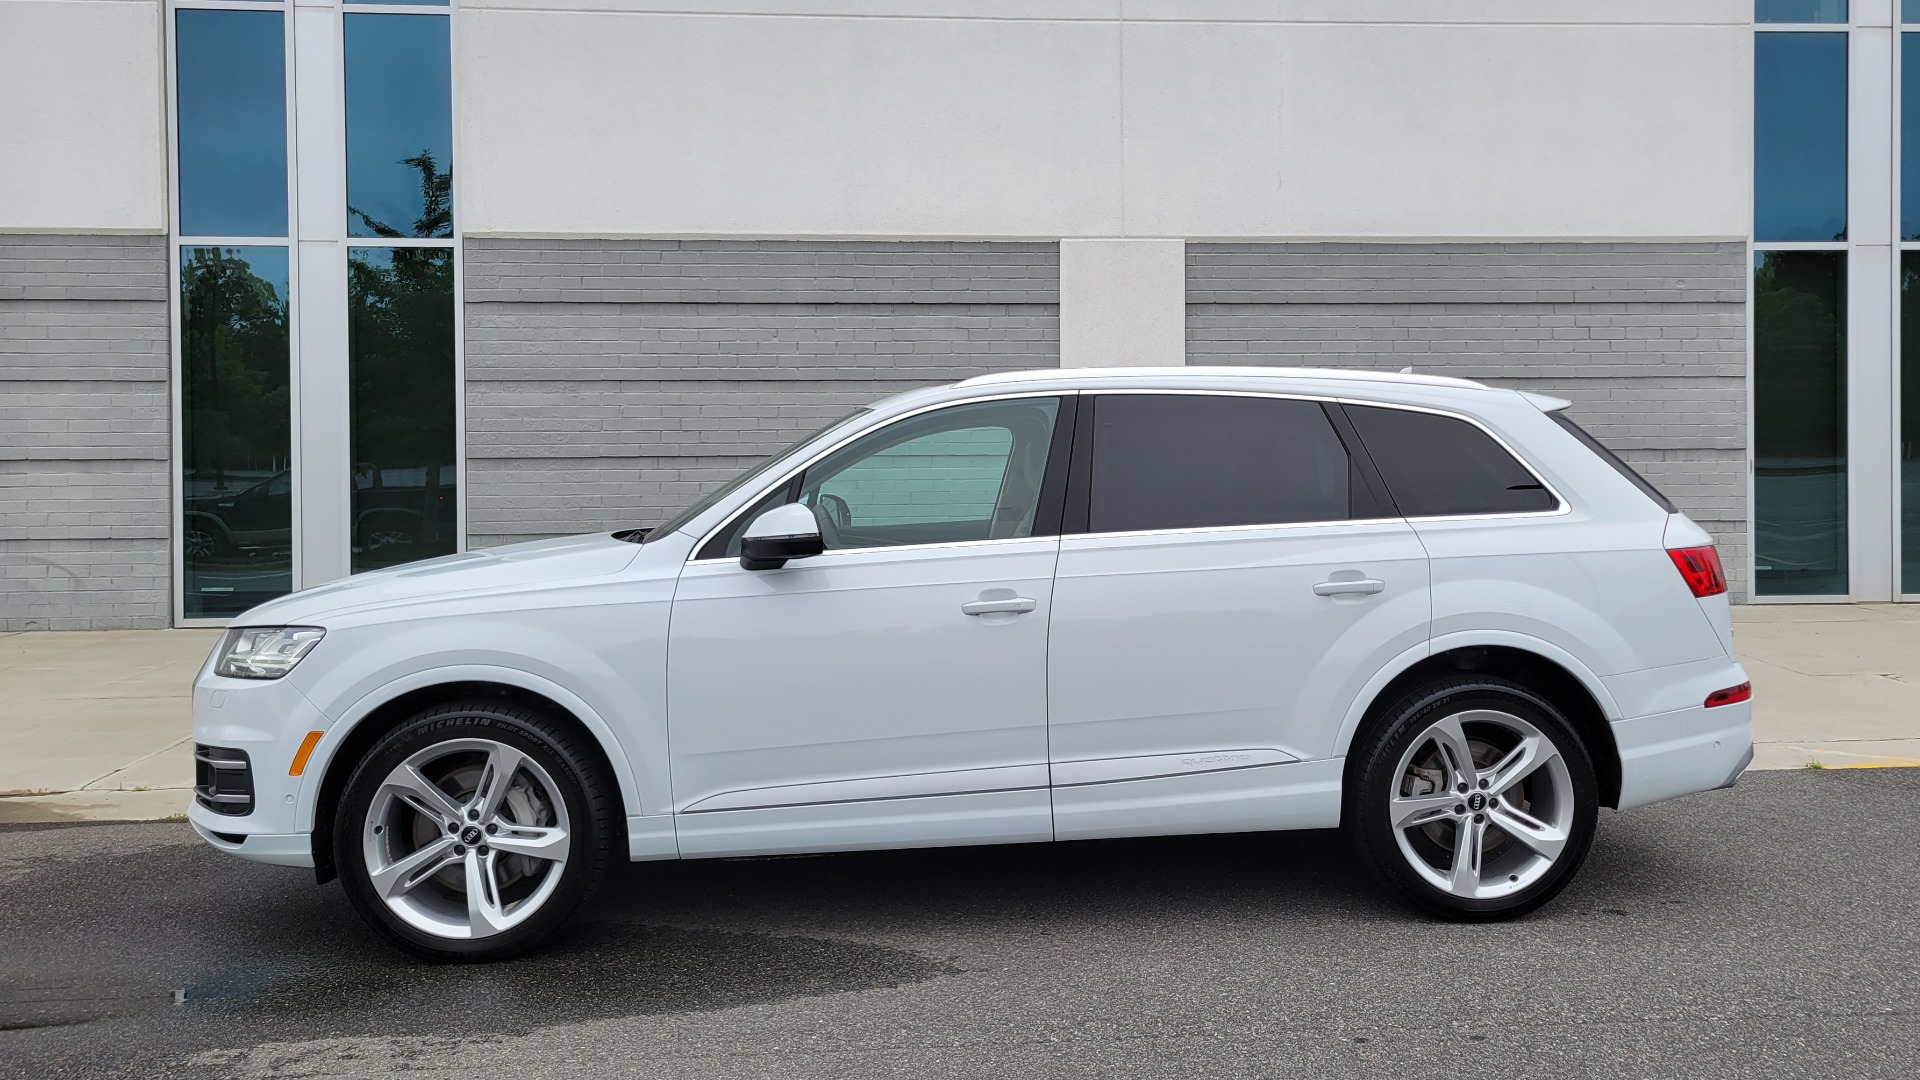 Used 2019 Audi Q7 PRESTIGE / CONV PKG / BOSE / HUD / CLD WTHR / TOWING / REARVIEW for sale $51,995 at Formula Imports in Charlotte NC 28227 4